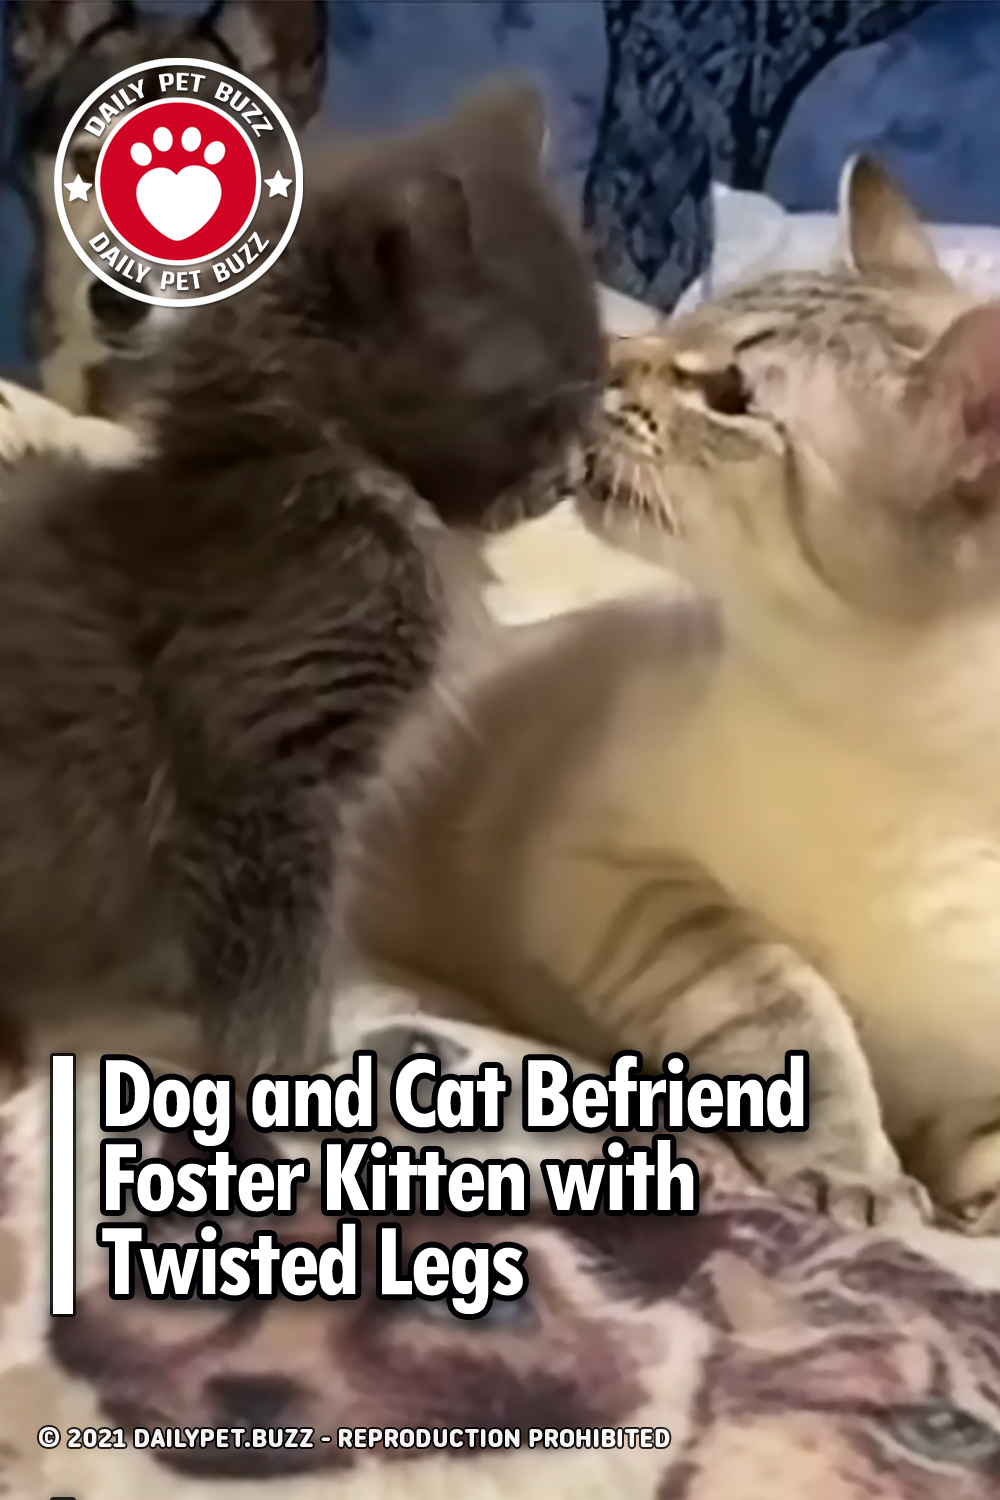 Dog and Cat Befriend Foster Kitten with Twisted Legs